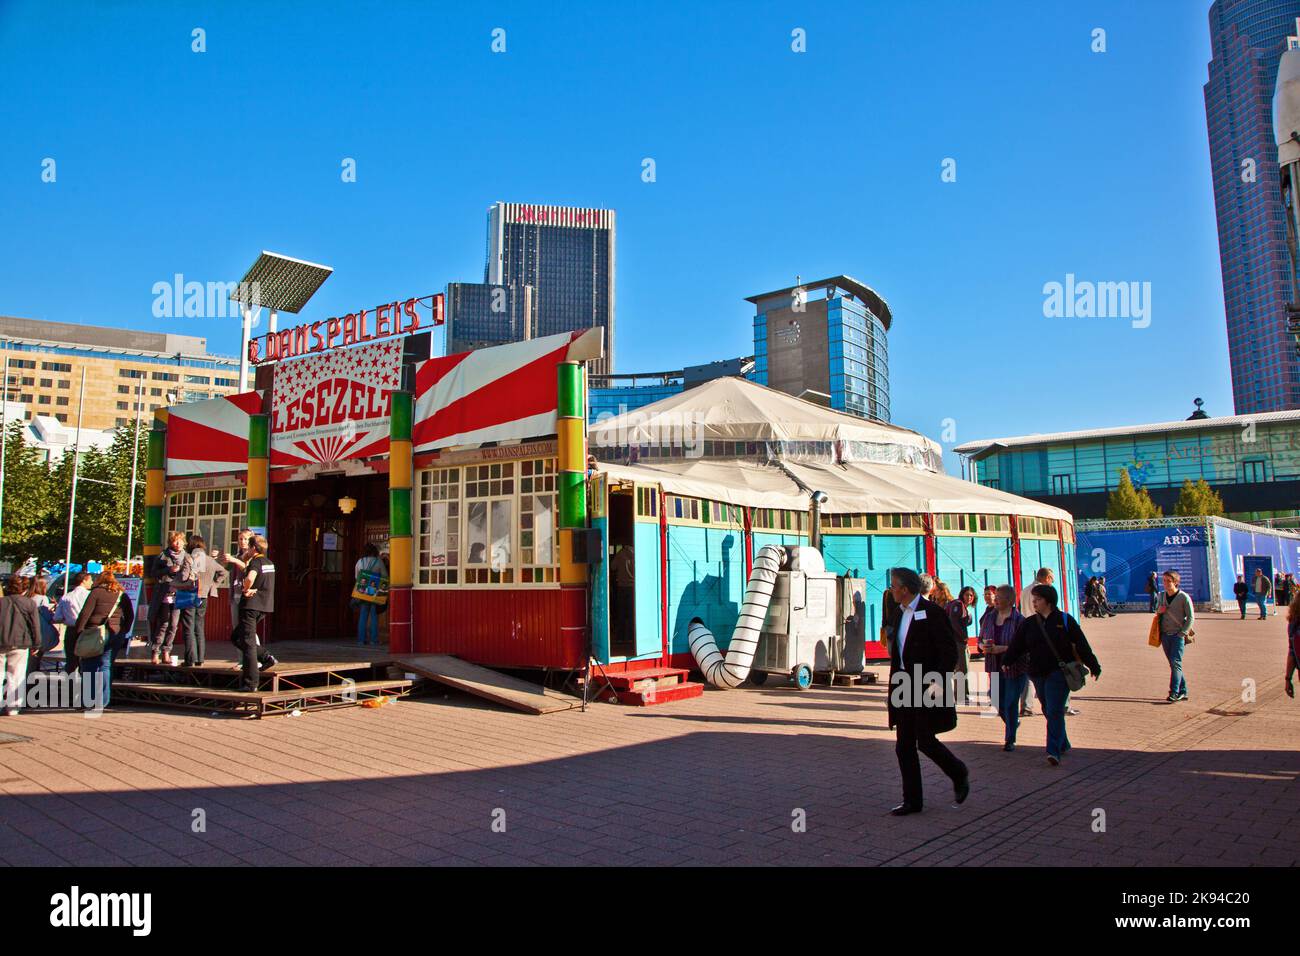 FRANKFURT, GERMANY - OCTOBER 10, 2010: public day for Frankfurt Book fair, colorful historic circus tent as reading tent at the fair in Frankfurt, Ger Stock Photo